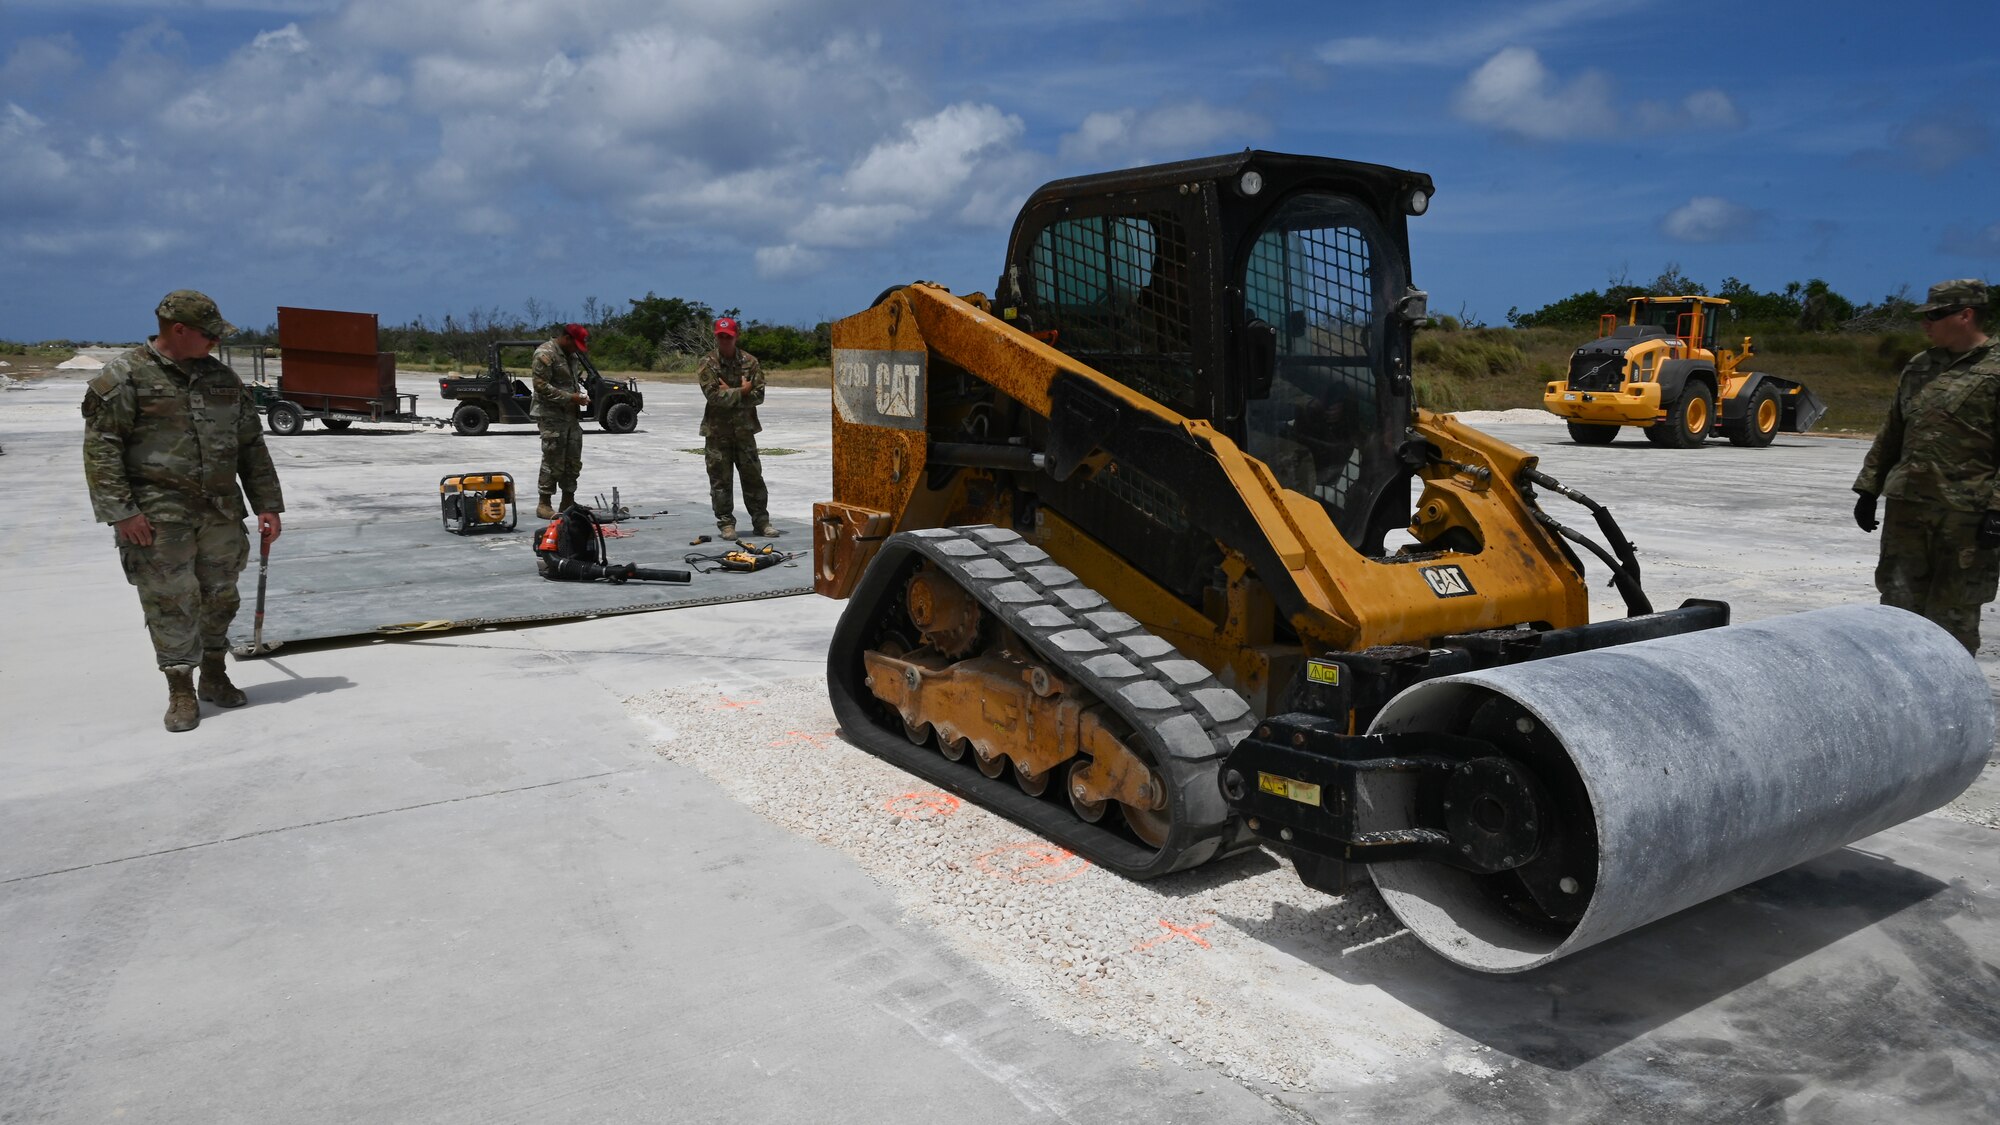 Airmen use a compact track loader to pull a fiber reinforced polymer matting over a crushed stone crater repair.